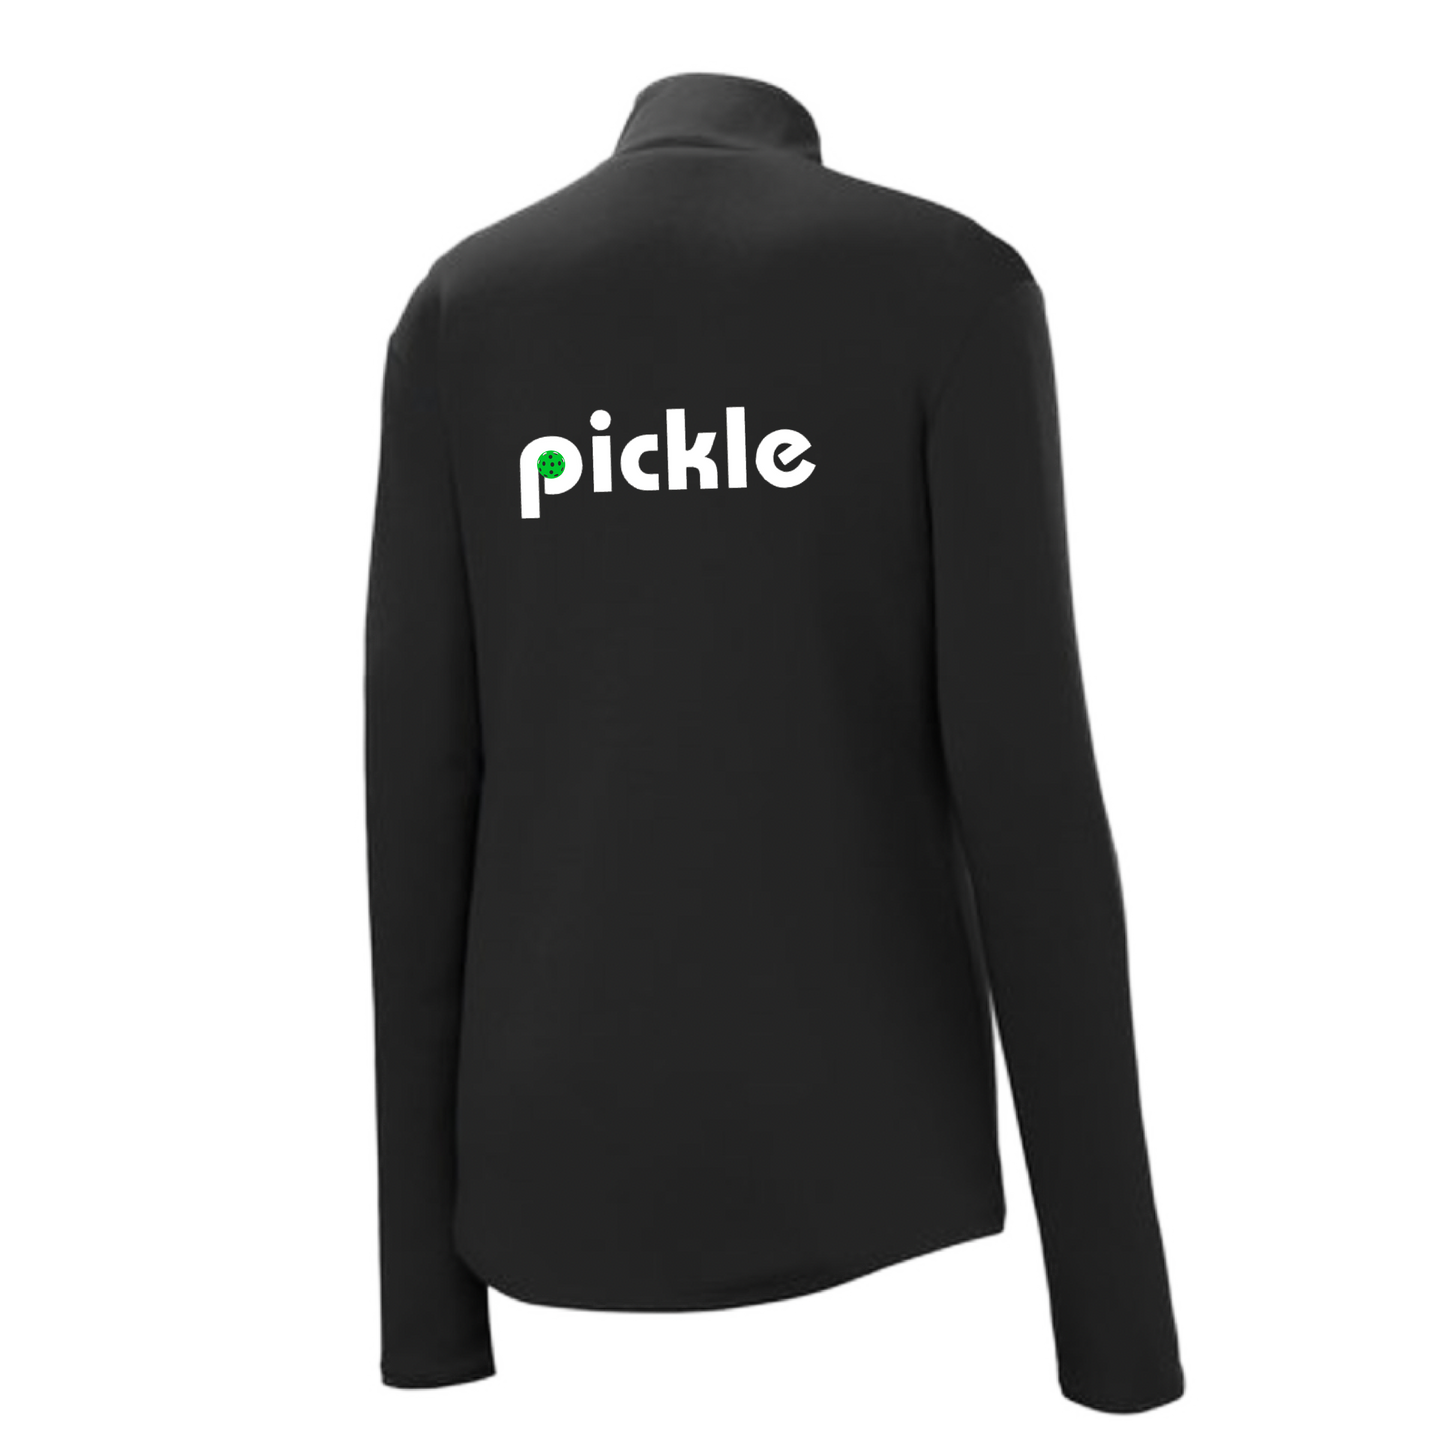 Revel in the feel of this Women's pickleball shirt, where softness and flair work in perfect harmony. Don't worry about sweat, the material is moisture-wicking and luxuriously soft. Color won't fade thanks to PosiCharge technology and you won't overheat in its ultra-breathable lightweight design. Rock it year-round!